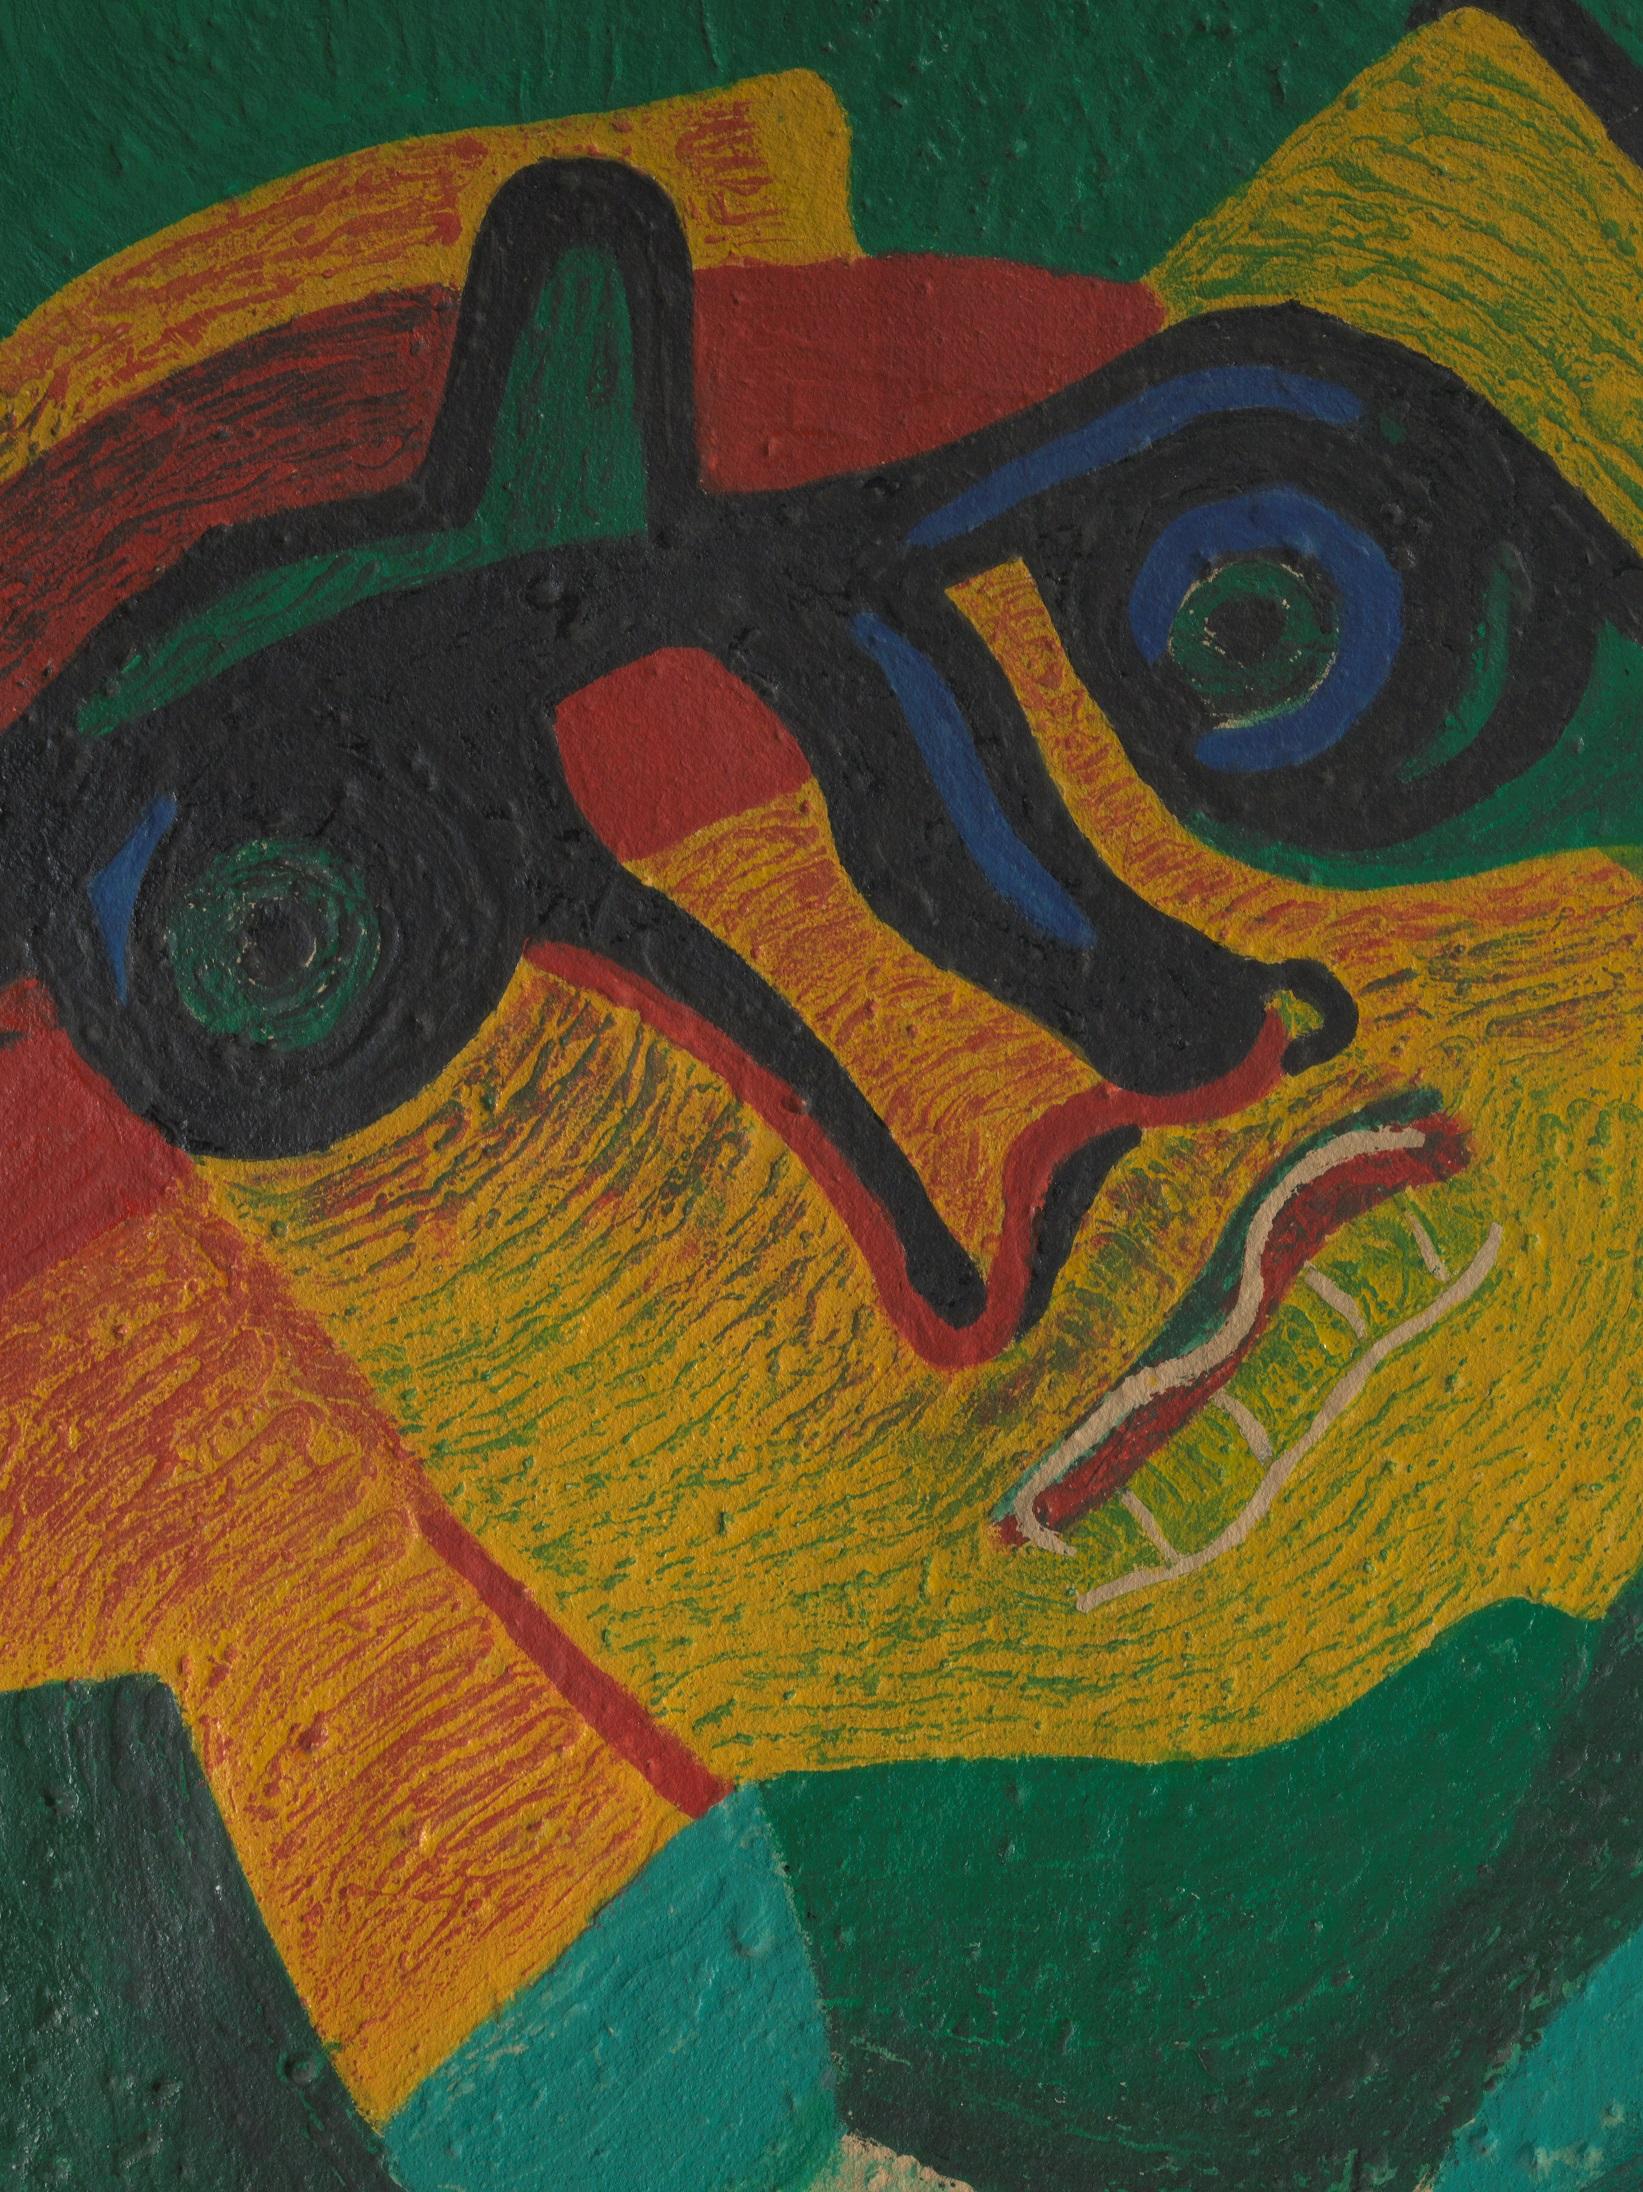 The ‘Multicolored Man’ depicts a head with an enlarged nose and ear and worried looking eyes and mouth. The characteristics are yellow, orange, blue, white, green and red. on a lively blue and green background. On the left side, a deformation of the